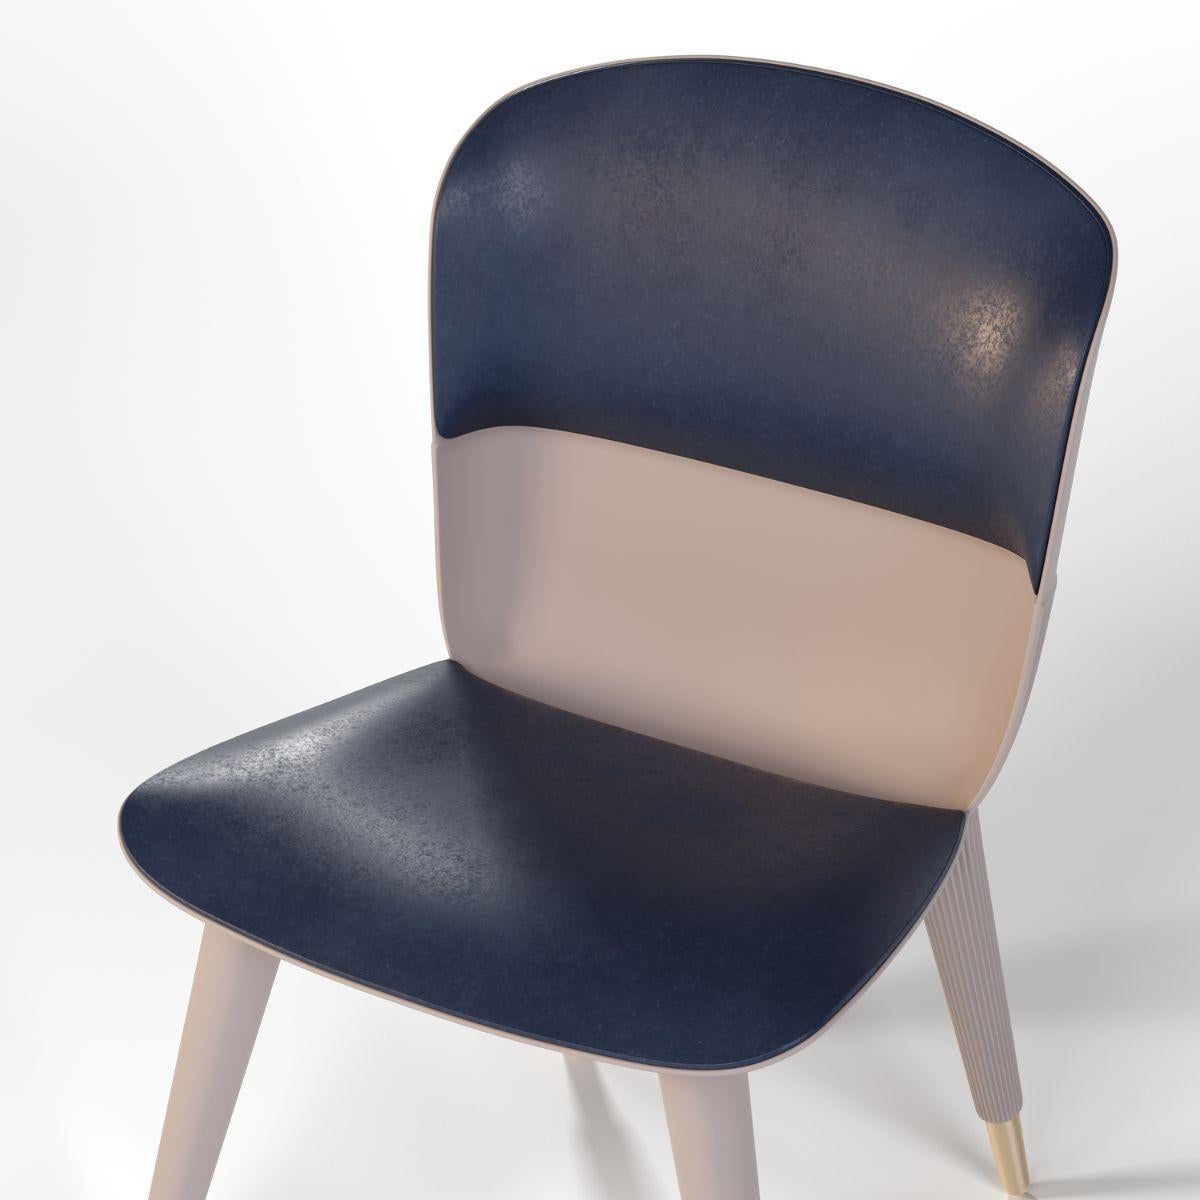 Eleanor Dining Chair 

The Eleanor dining chair is a piece whose starting point is comfort and functionality. Its simple design, feminine curves, and undulating texture highlight and enrich its key points - legs, backrest and seat. The final touch